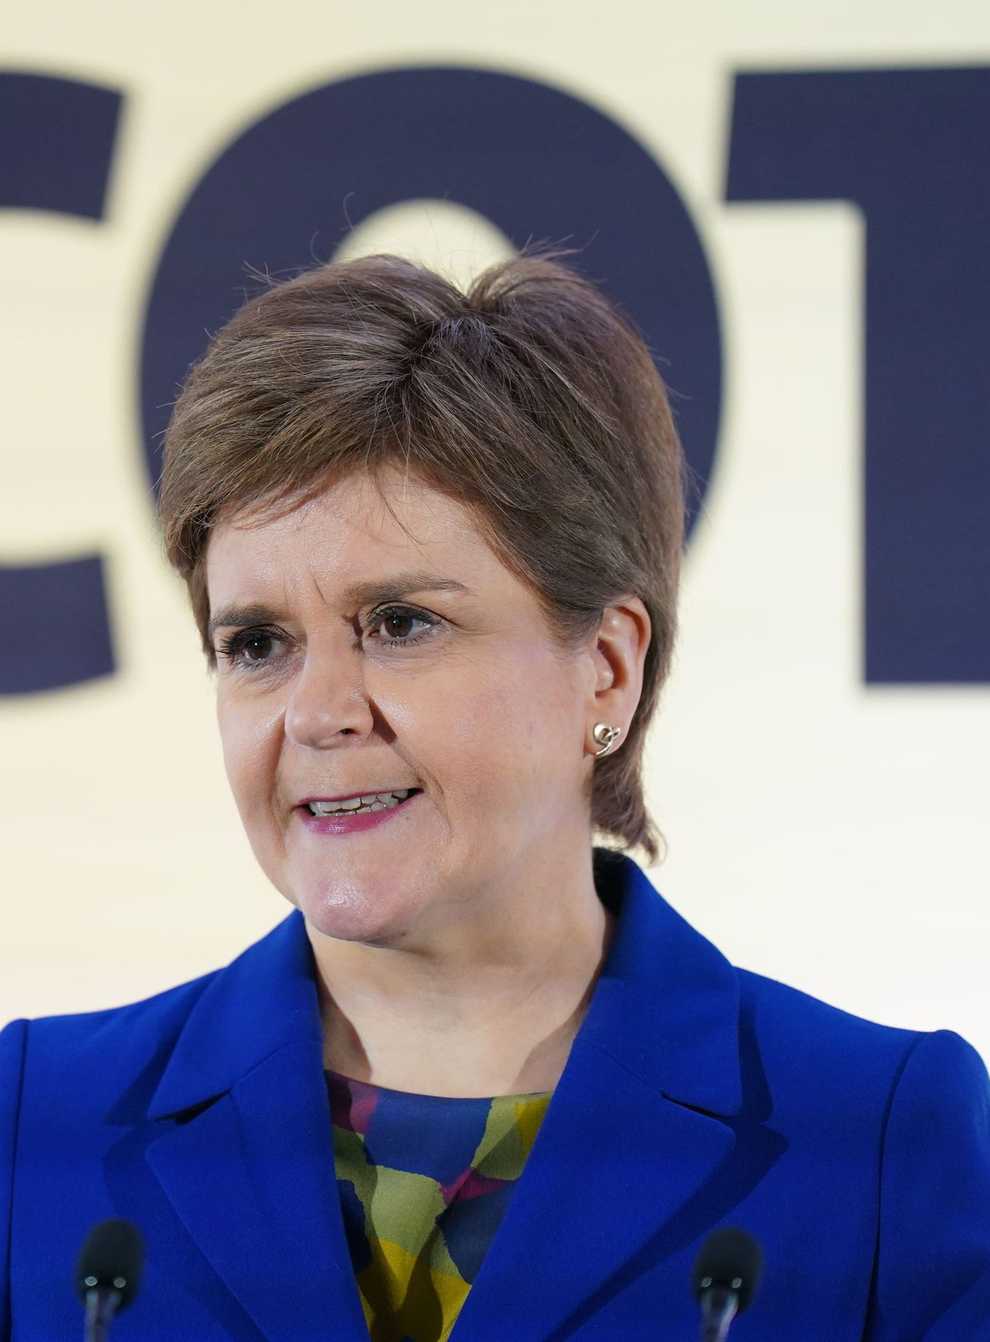 Nicola Sturgeon accused unionist parties of being scared of indyref2 (Jane Barlow/PA)